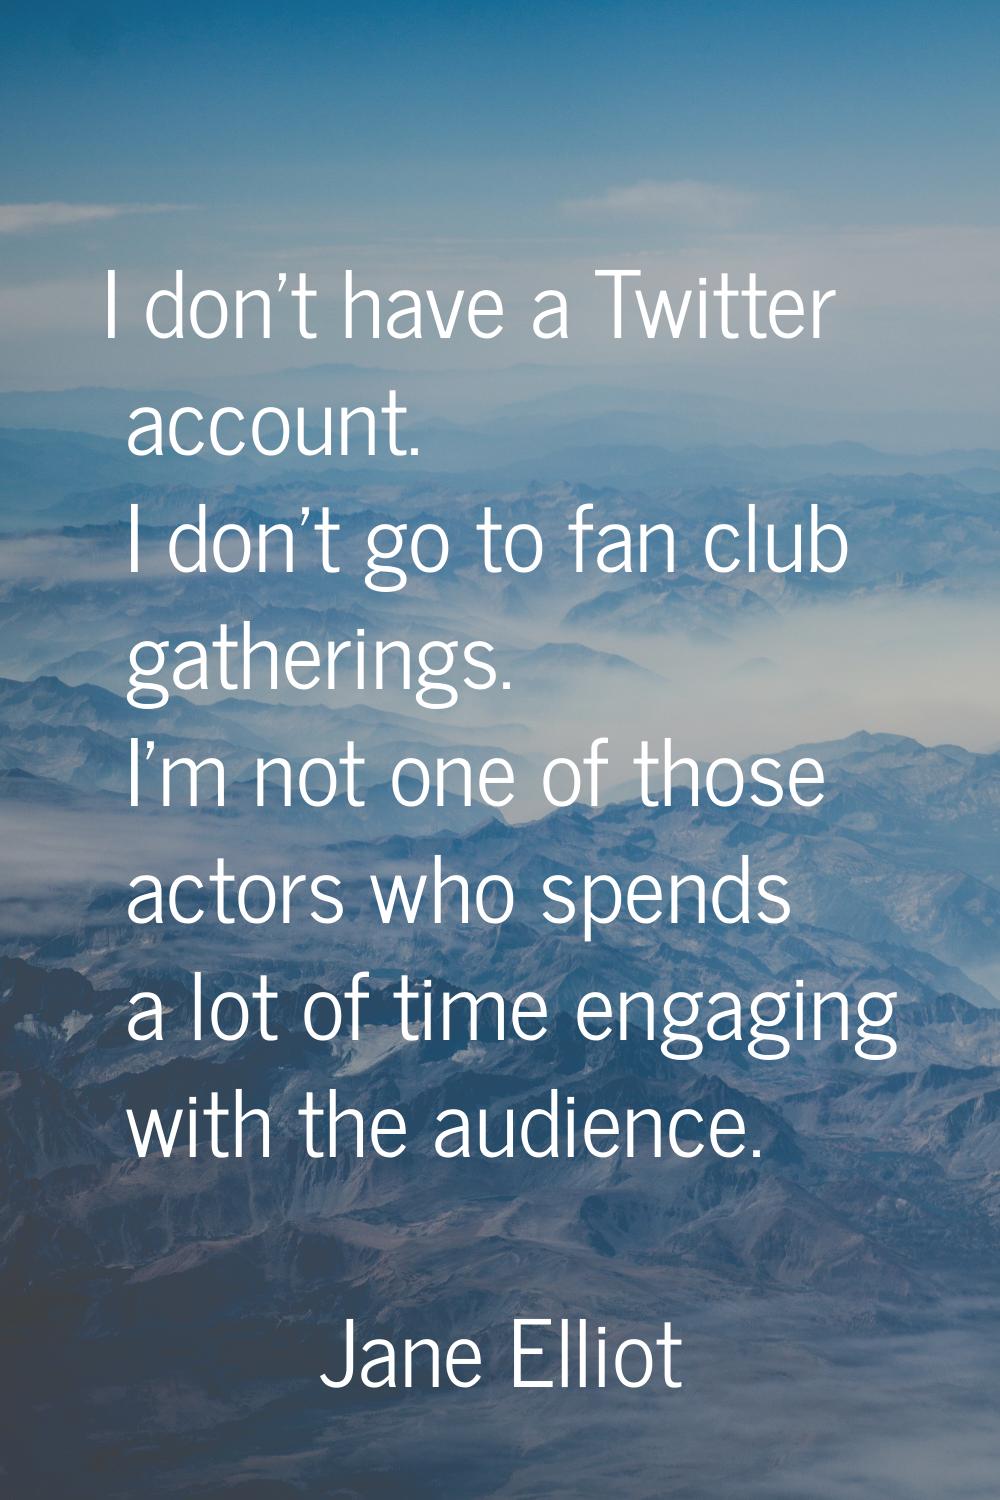 I don't have a Twitter account. I don't go to fan club gatherings. I'm not one of those actors who 